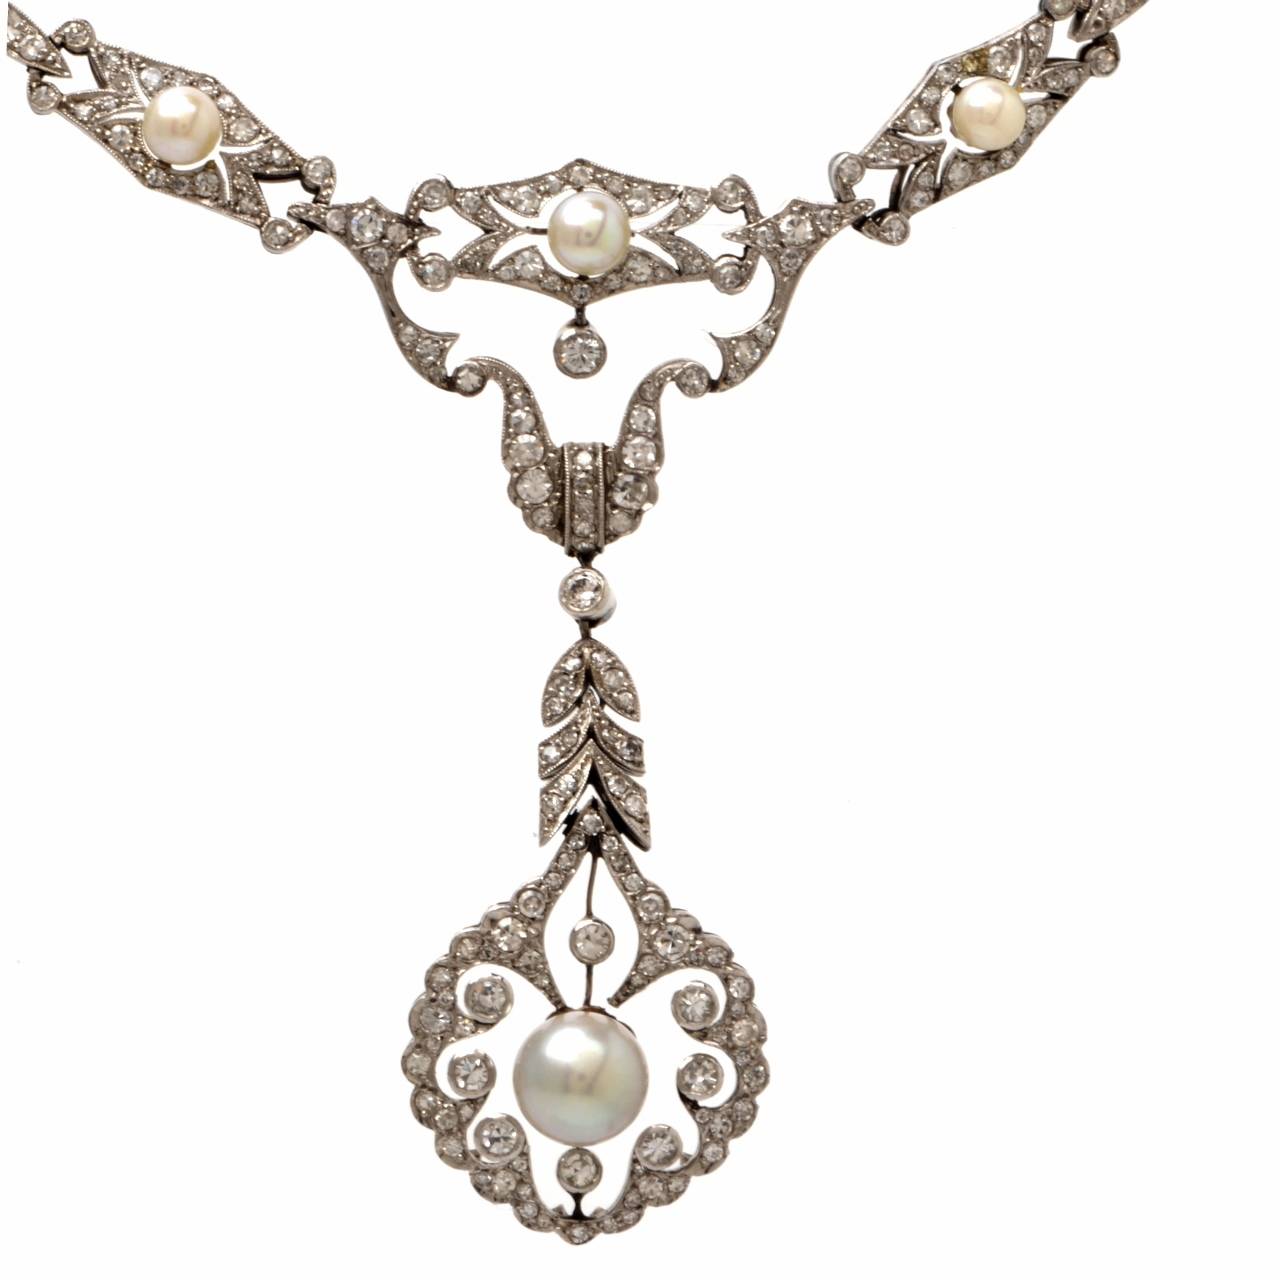 This Breathtaking  Edwardian  diamond pearl necklace of exquisite garland  design and  artistic craftsmanship , is of European provenance,  constructed in solid platinum, weighing 29.4 grams and measuring 17 1/2